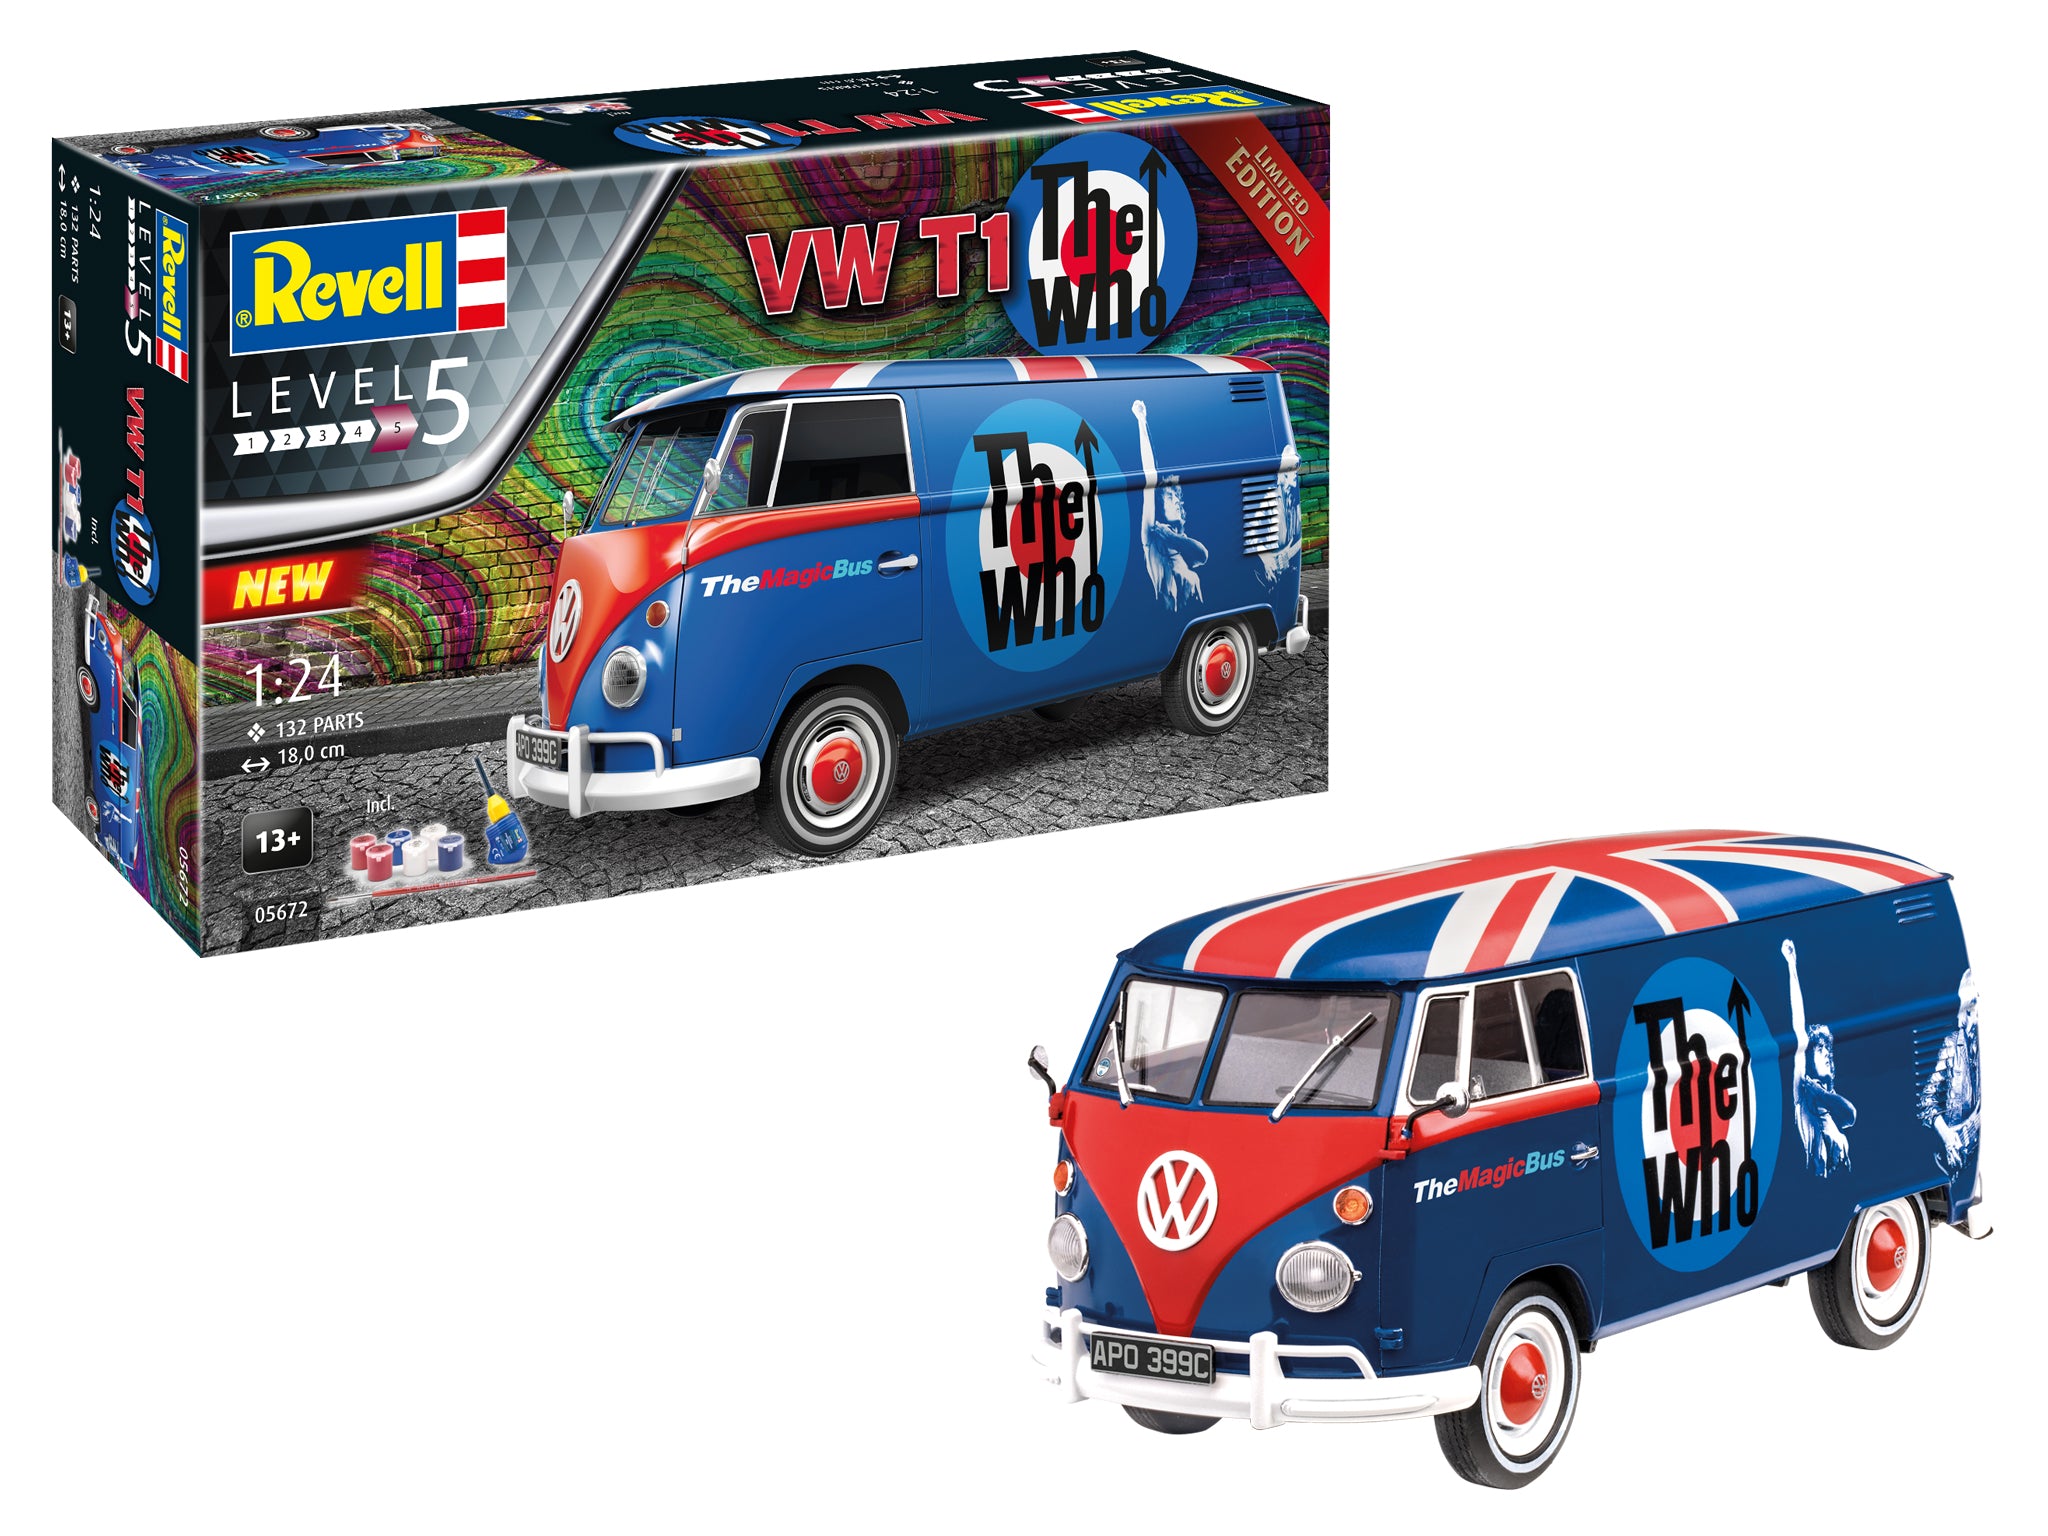 REVELL GIFT SET VW T1 "THE WHO" 1:24 Scale 05672